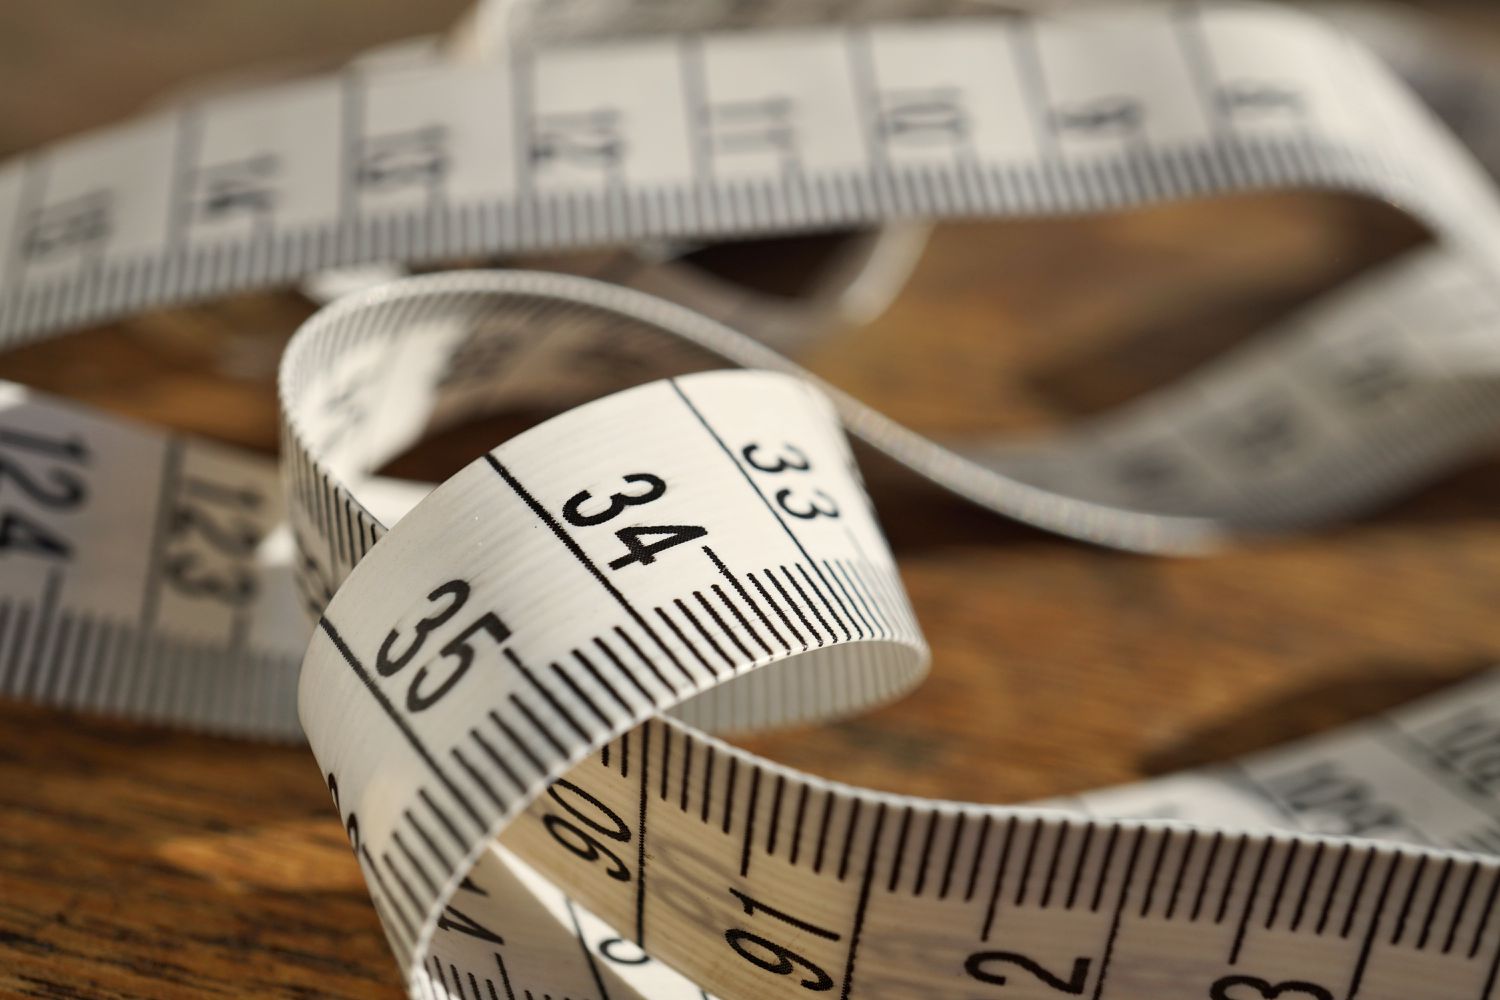 White tape measure (tape measuring length in meters and centimeters)